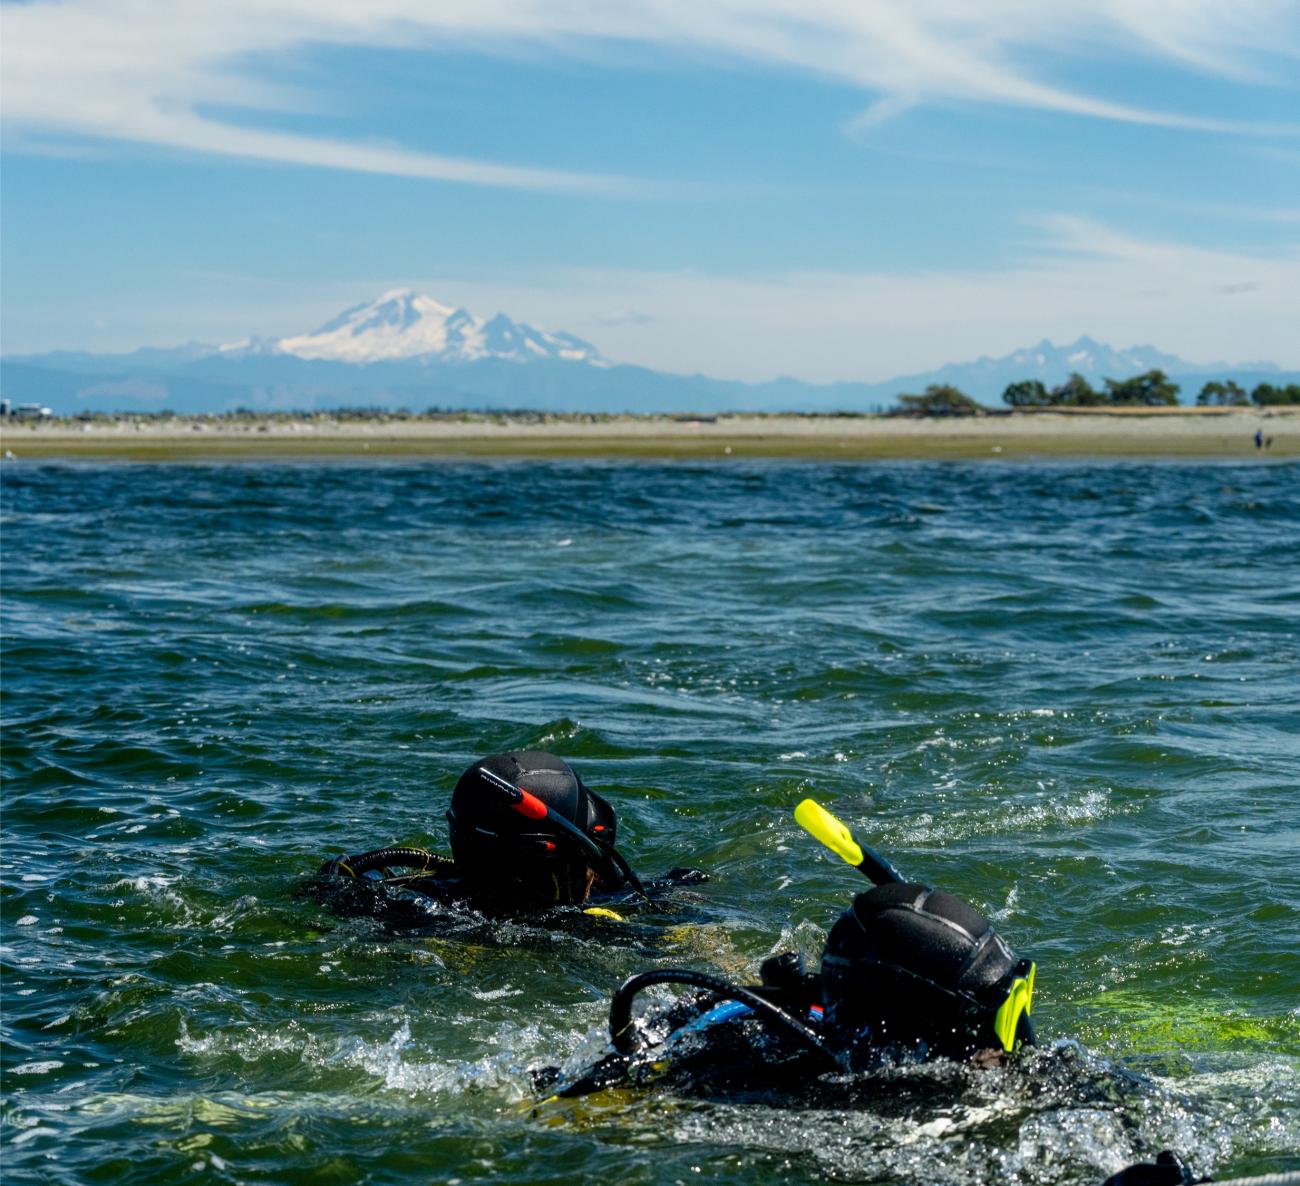 Two SCUBA divers peak out of water with Mt. Baker in background